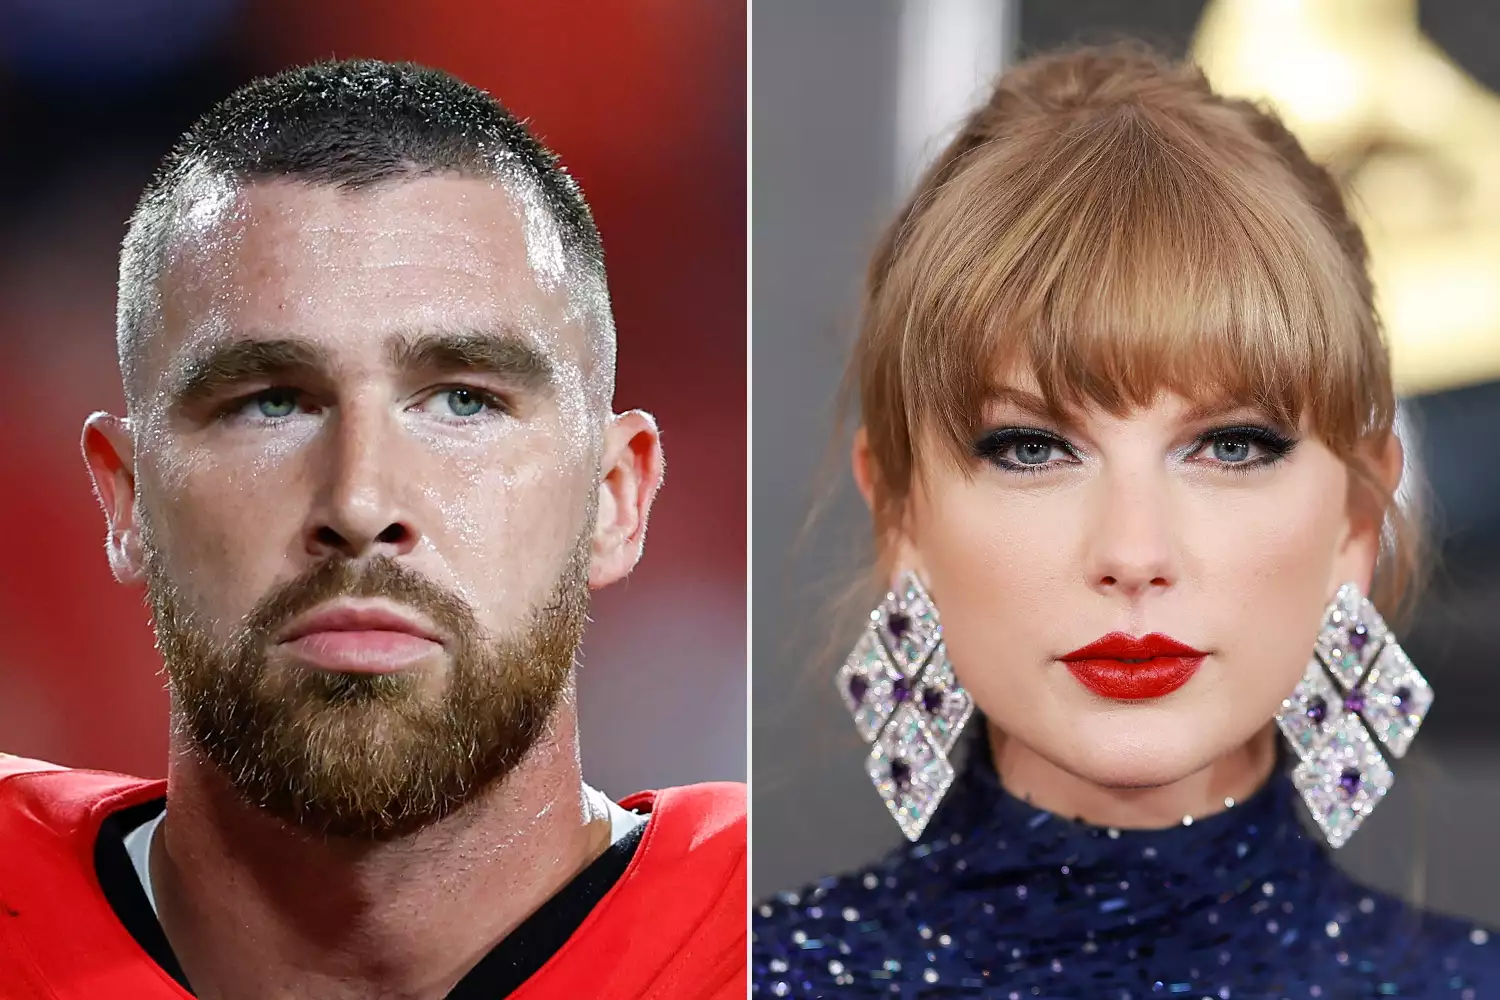 Taylor Swift fearlessly bid farewell to her detractors, asserting that she and Travis will rise above the attempt to bring them down, with unwavering confidence, she leaves the negativity behind, focusing on the happiness she shares with her partner 